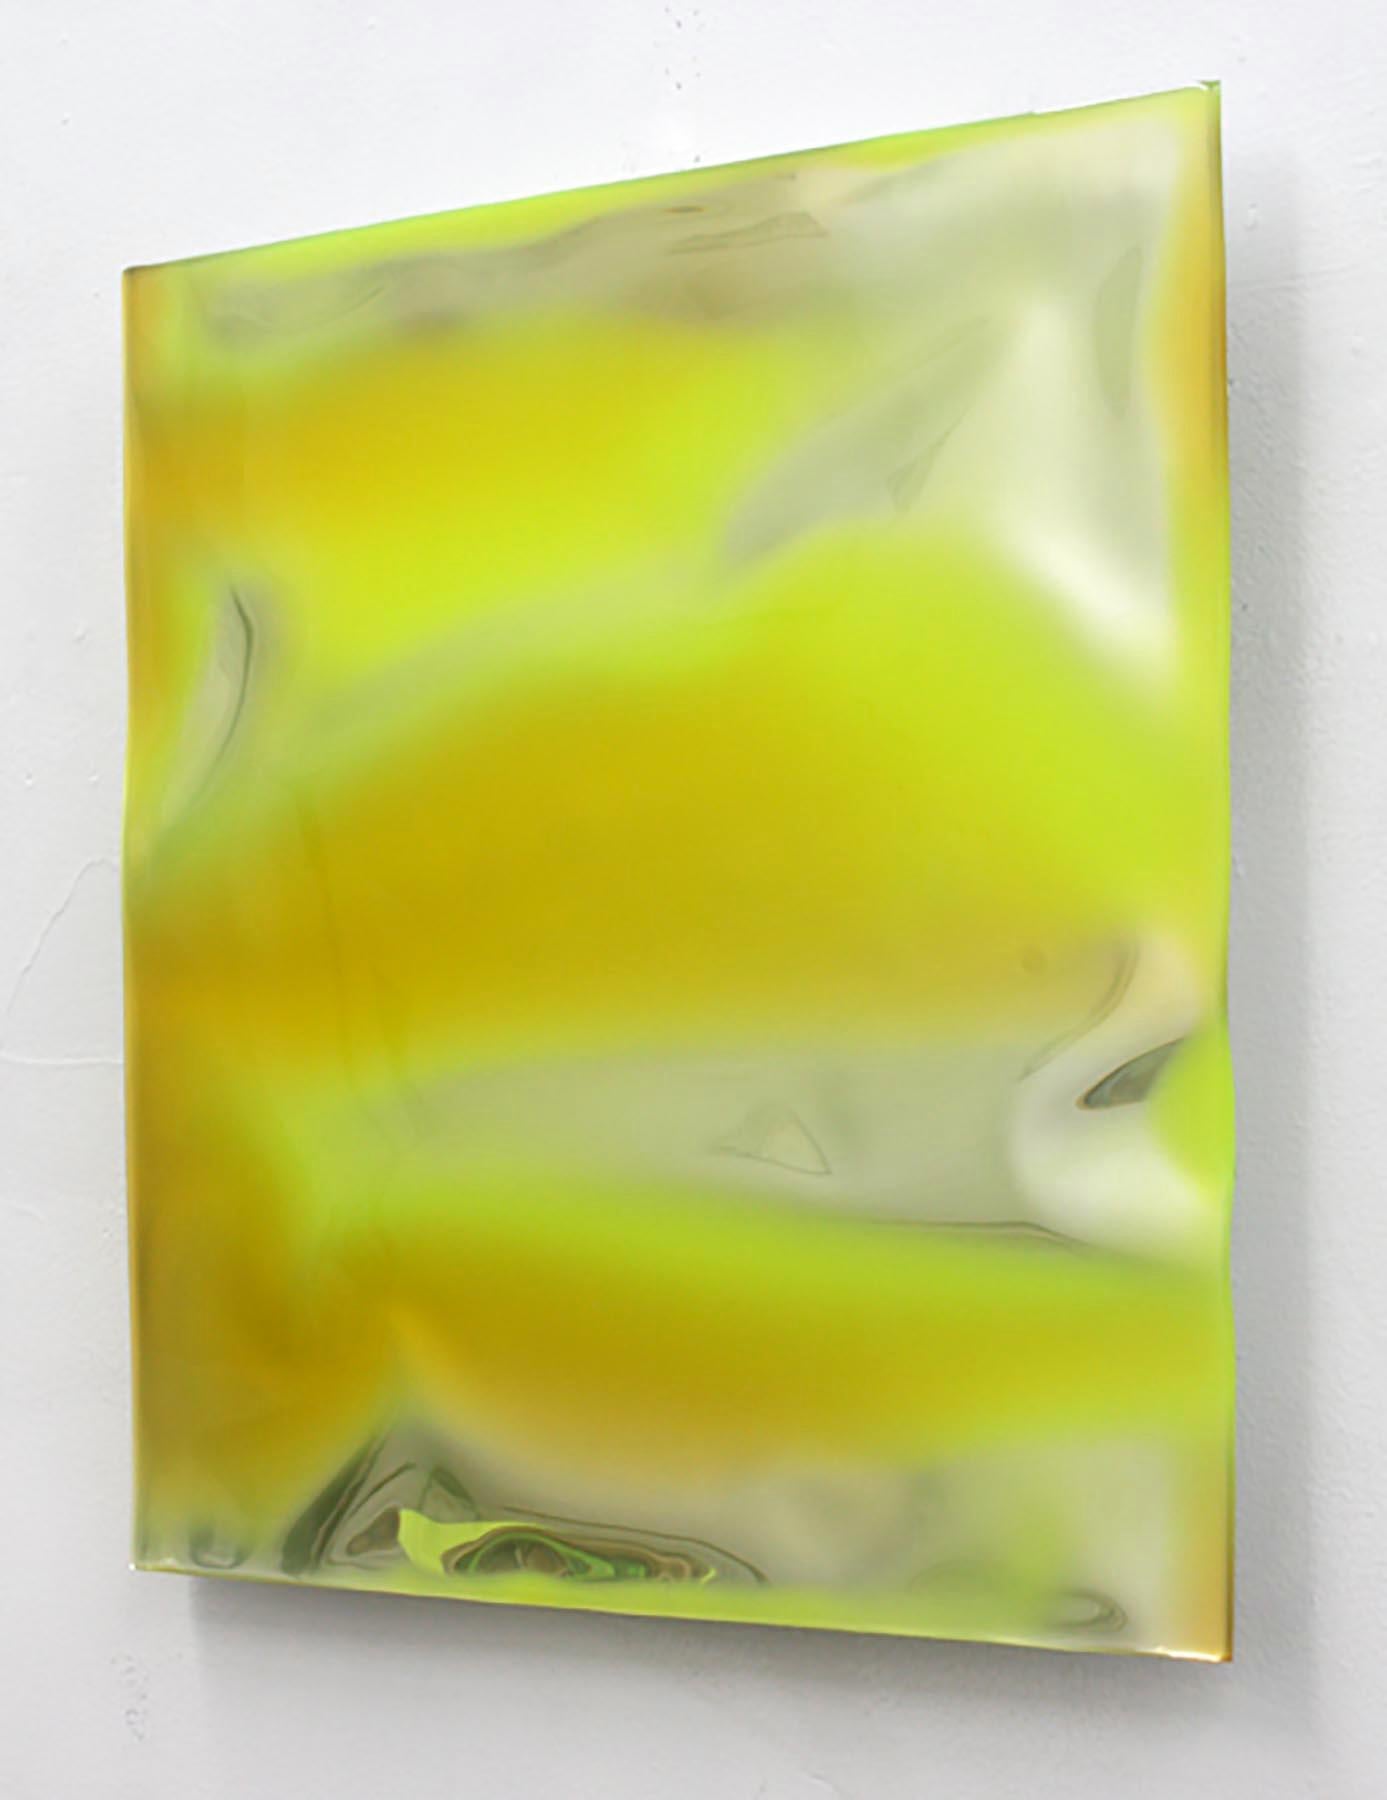 This beautiful yellow work is by Cathy Choi. Her pieces are minimalist, colorful and highly glossed surfaces.
Finding inspiration from the physical and metaphysical qualities of water.  The luminosity and fluid, changeable shape of water is recalled